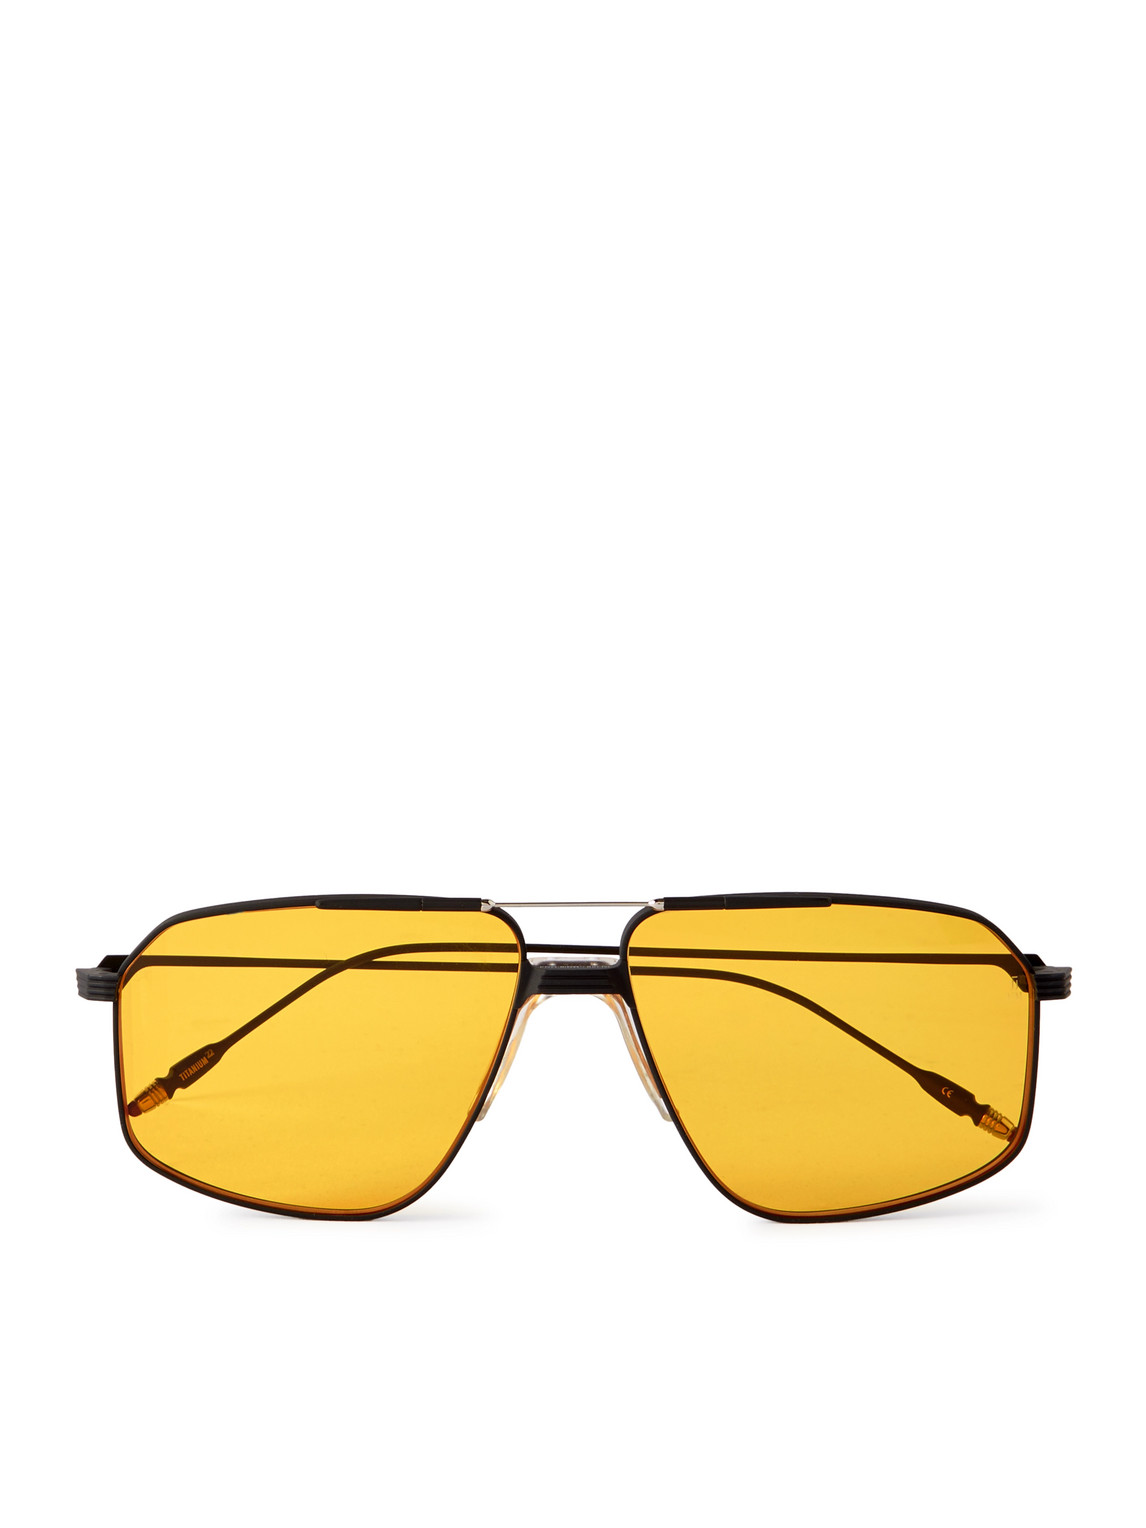 Jacques Marie Mage Jagger Aviator-style Titanium Sunglasses In Yellow